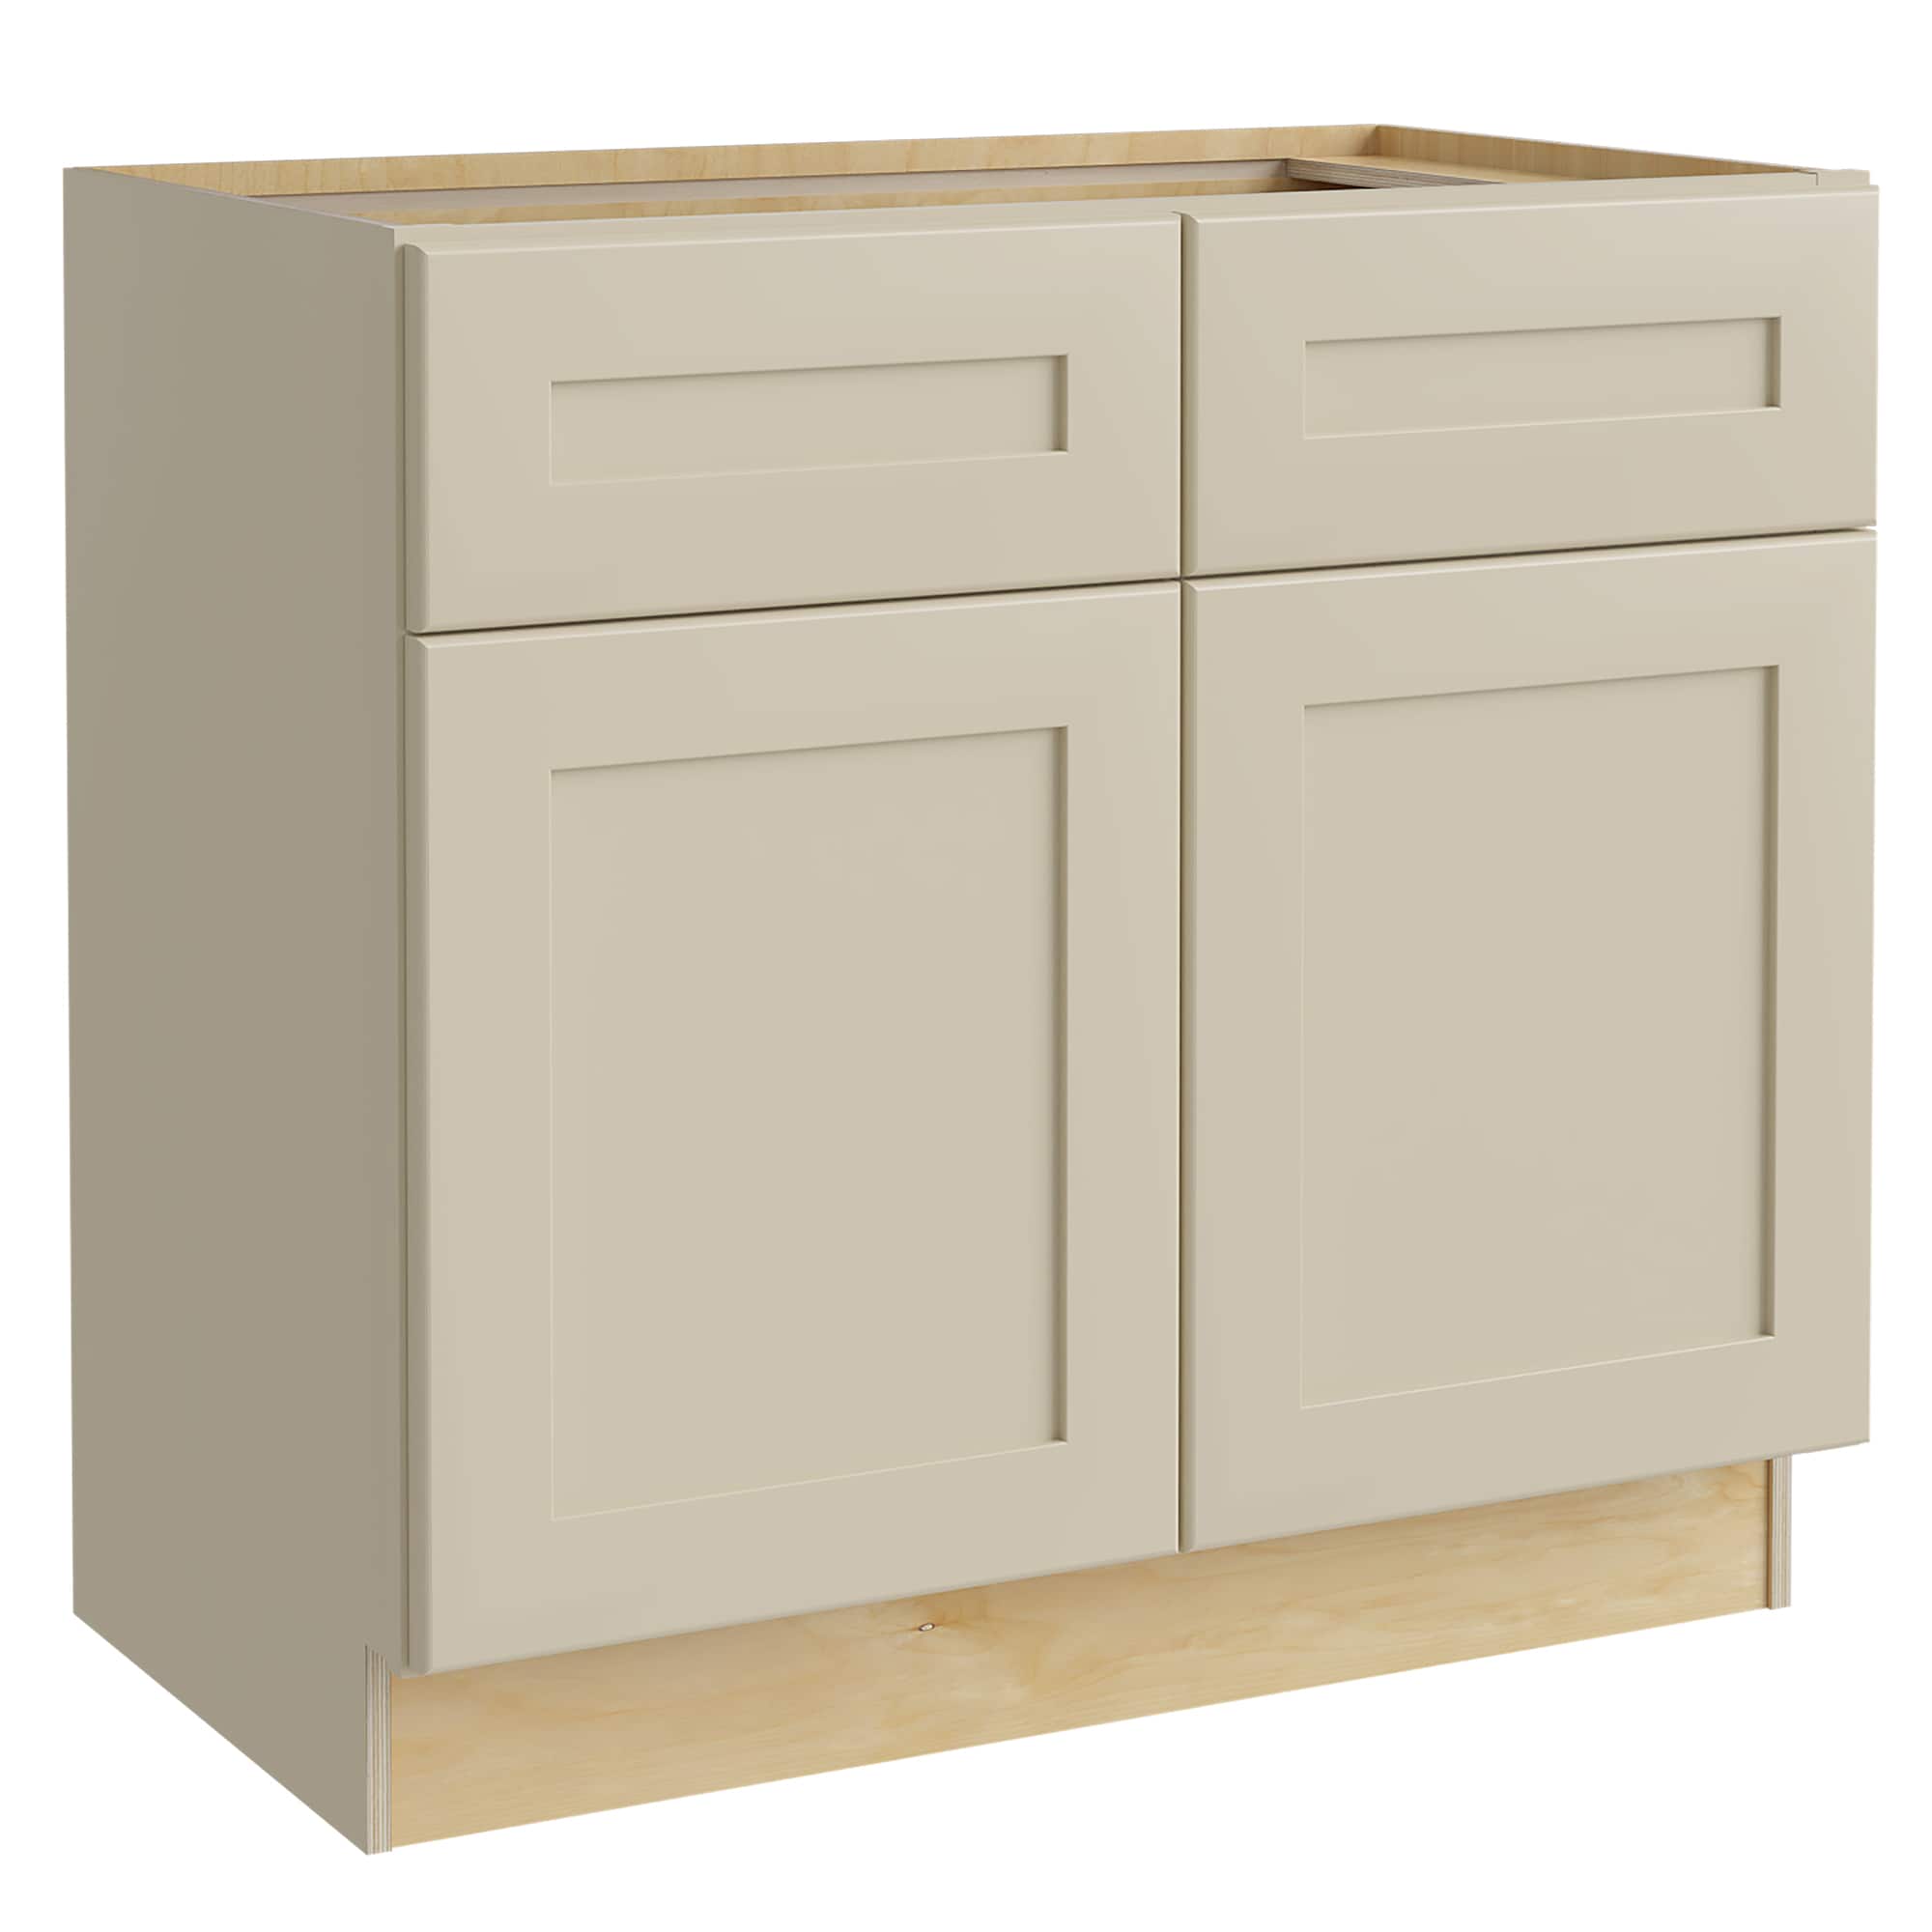 Luxxe Cabinetry 36-in W x 34.5-in H x 24-in D Norfolk Blended Cream Painted Sink Base Fully Assembled Semi-custom Cabinet in Off-White | SB36-NBC